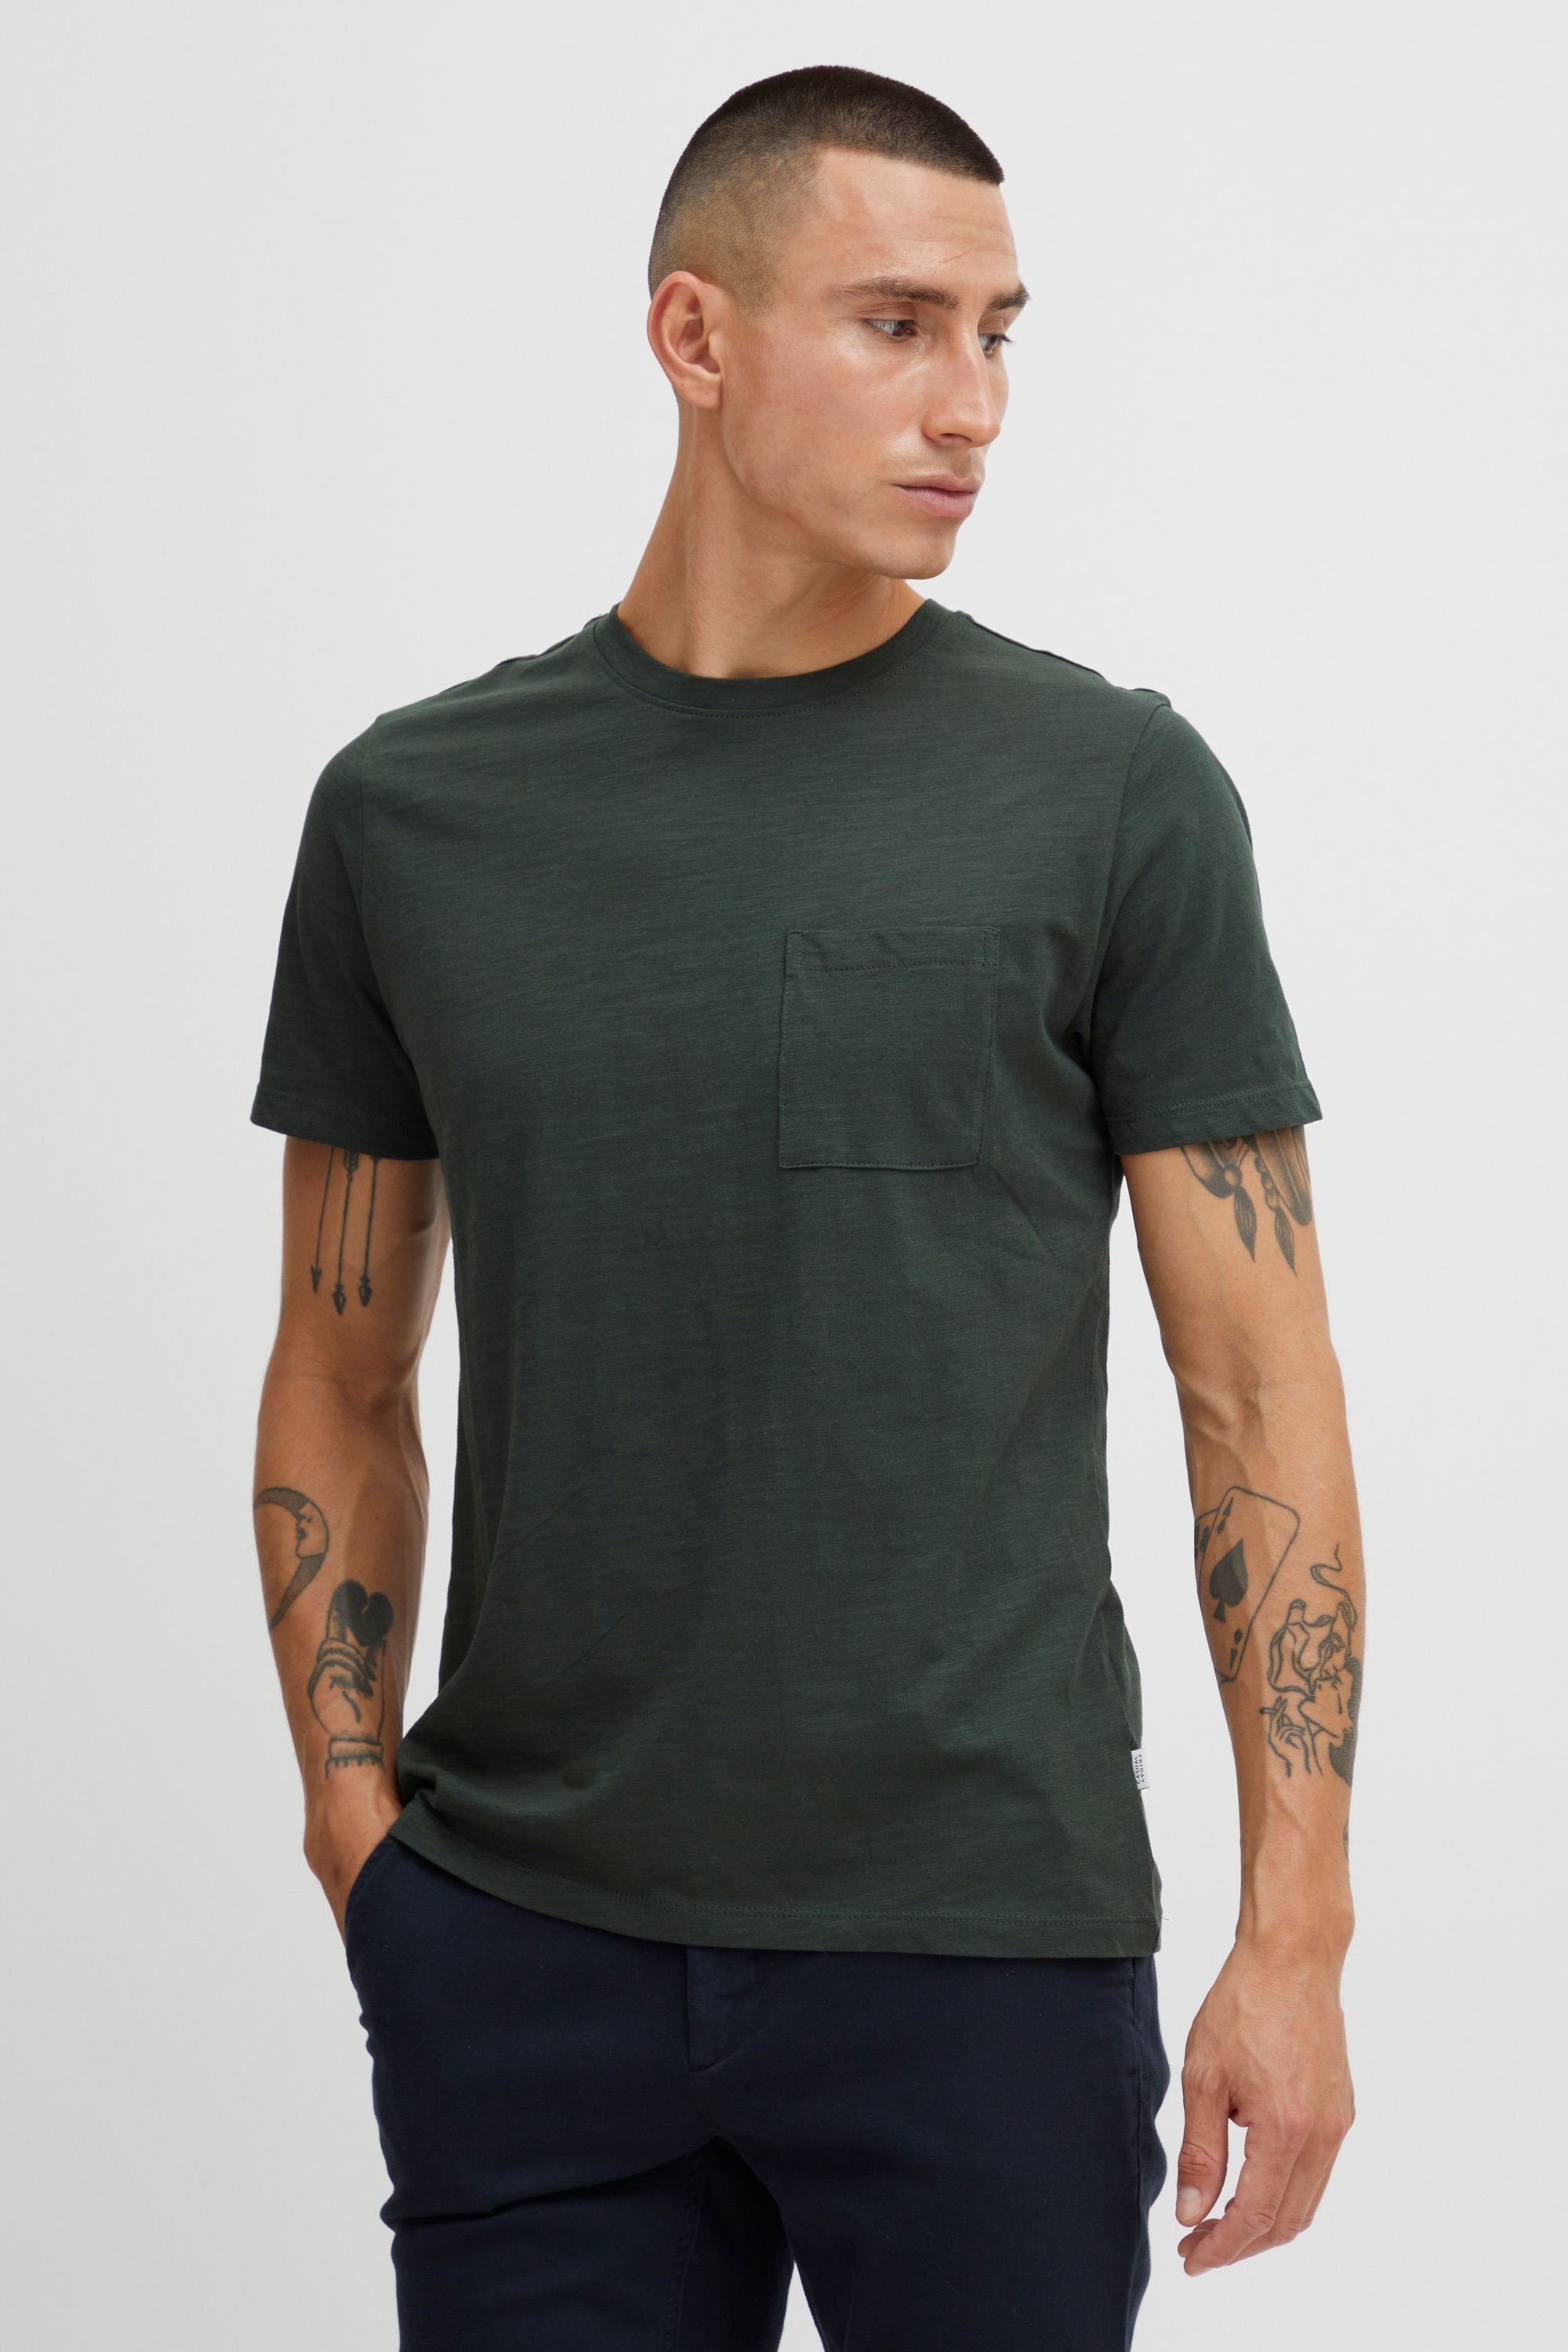 20504283 - T-Shirt Friday Forest Deep CFThor Casual (196110)